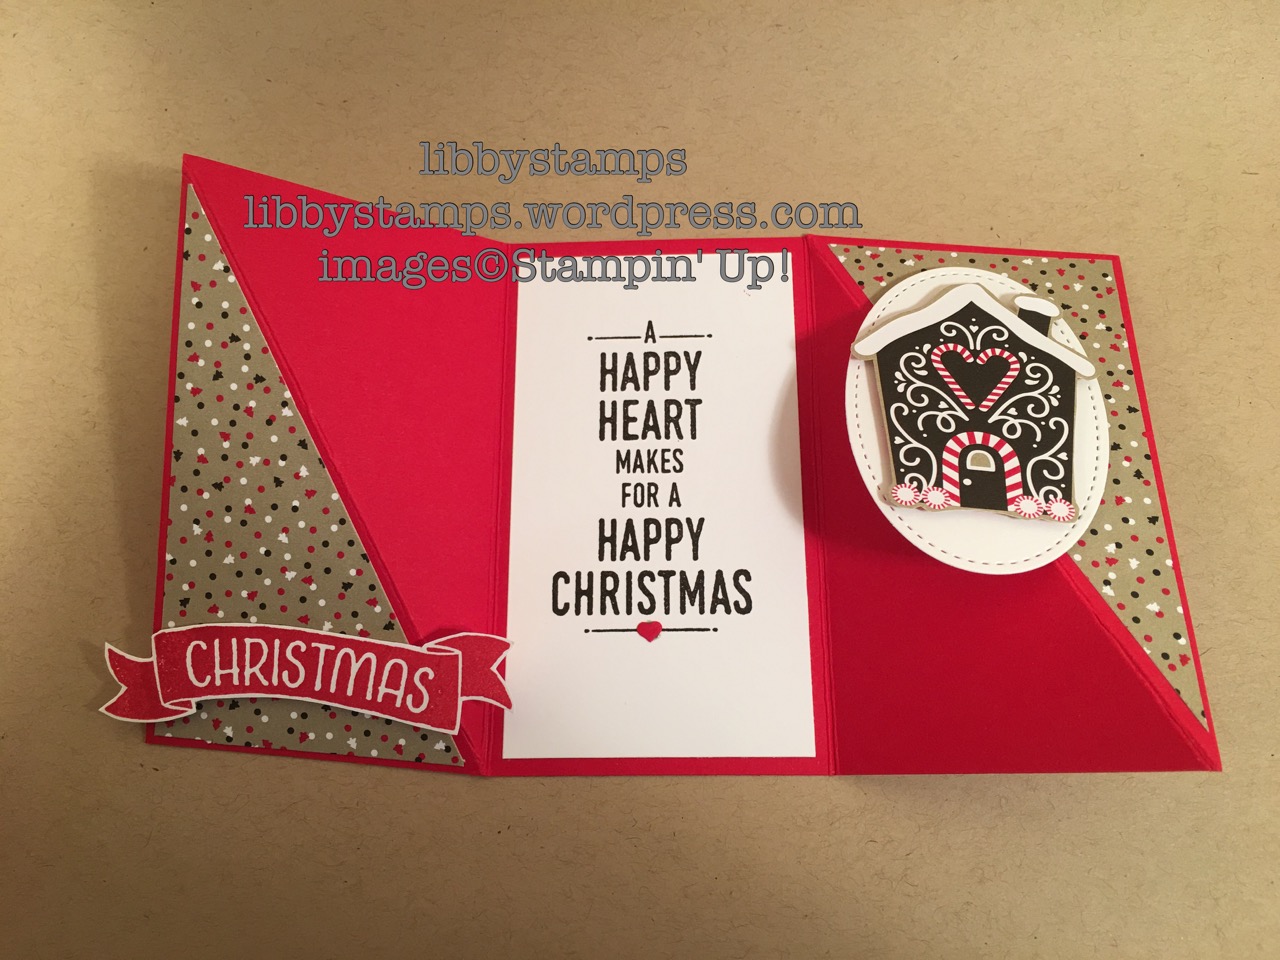 libbystamps, stampin up, Stitched Shapes Framelits, Candy Cane Lane, Suite Seasons, Time of Year, Twist Gate Fold